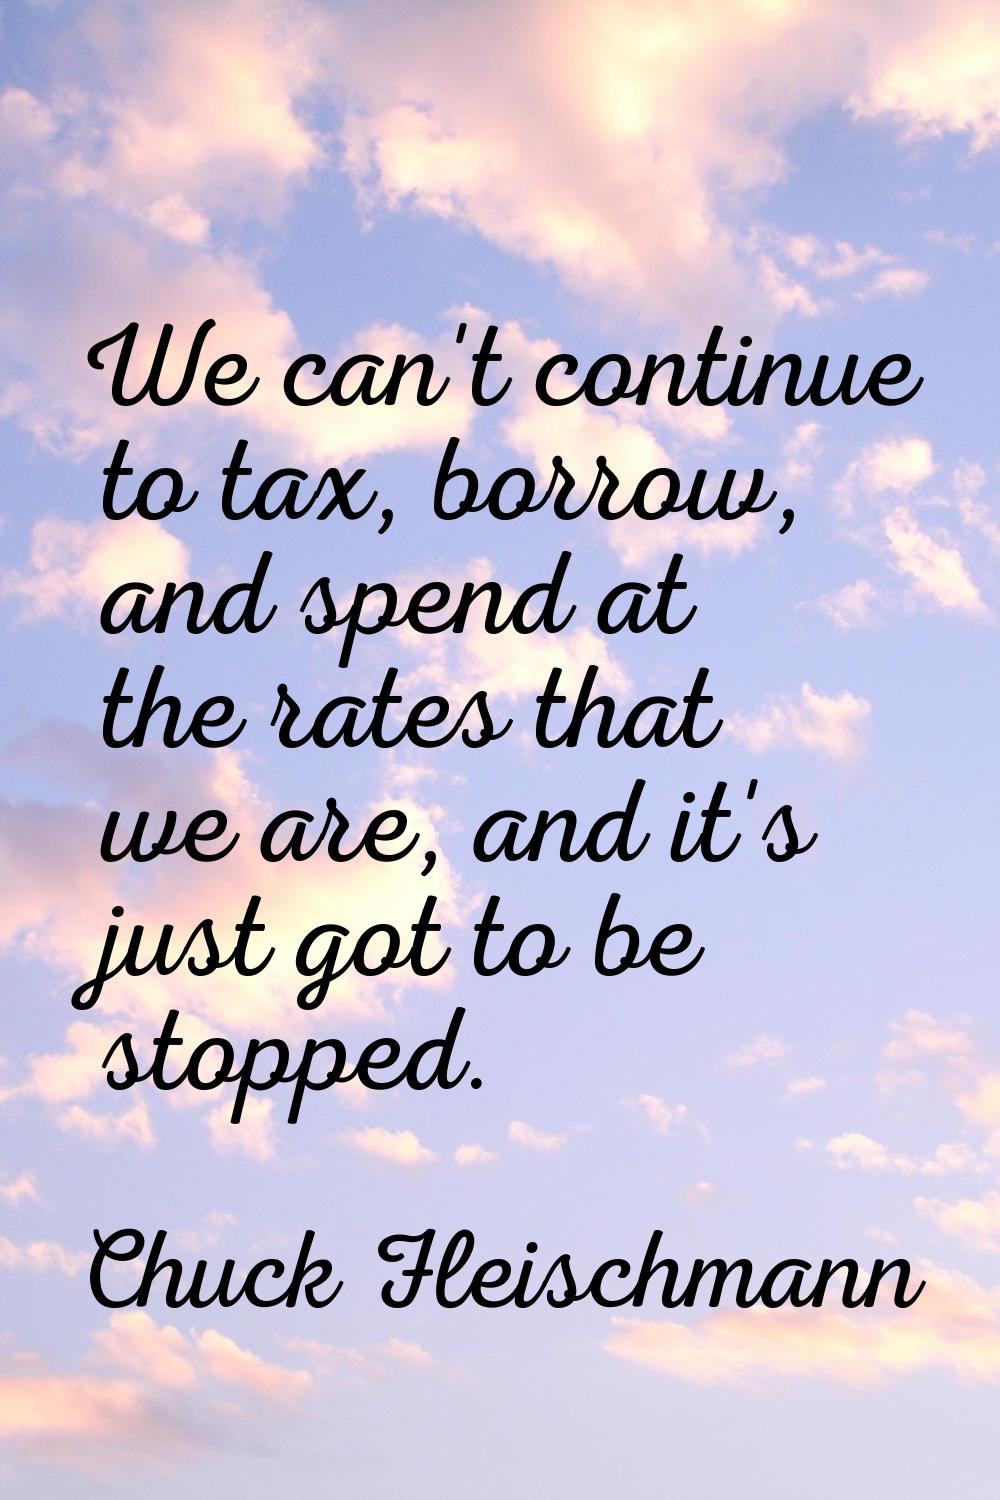 We can't continue to tax, borrow, and spend at the rates that we are, and it's just got to be stopp